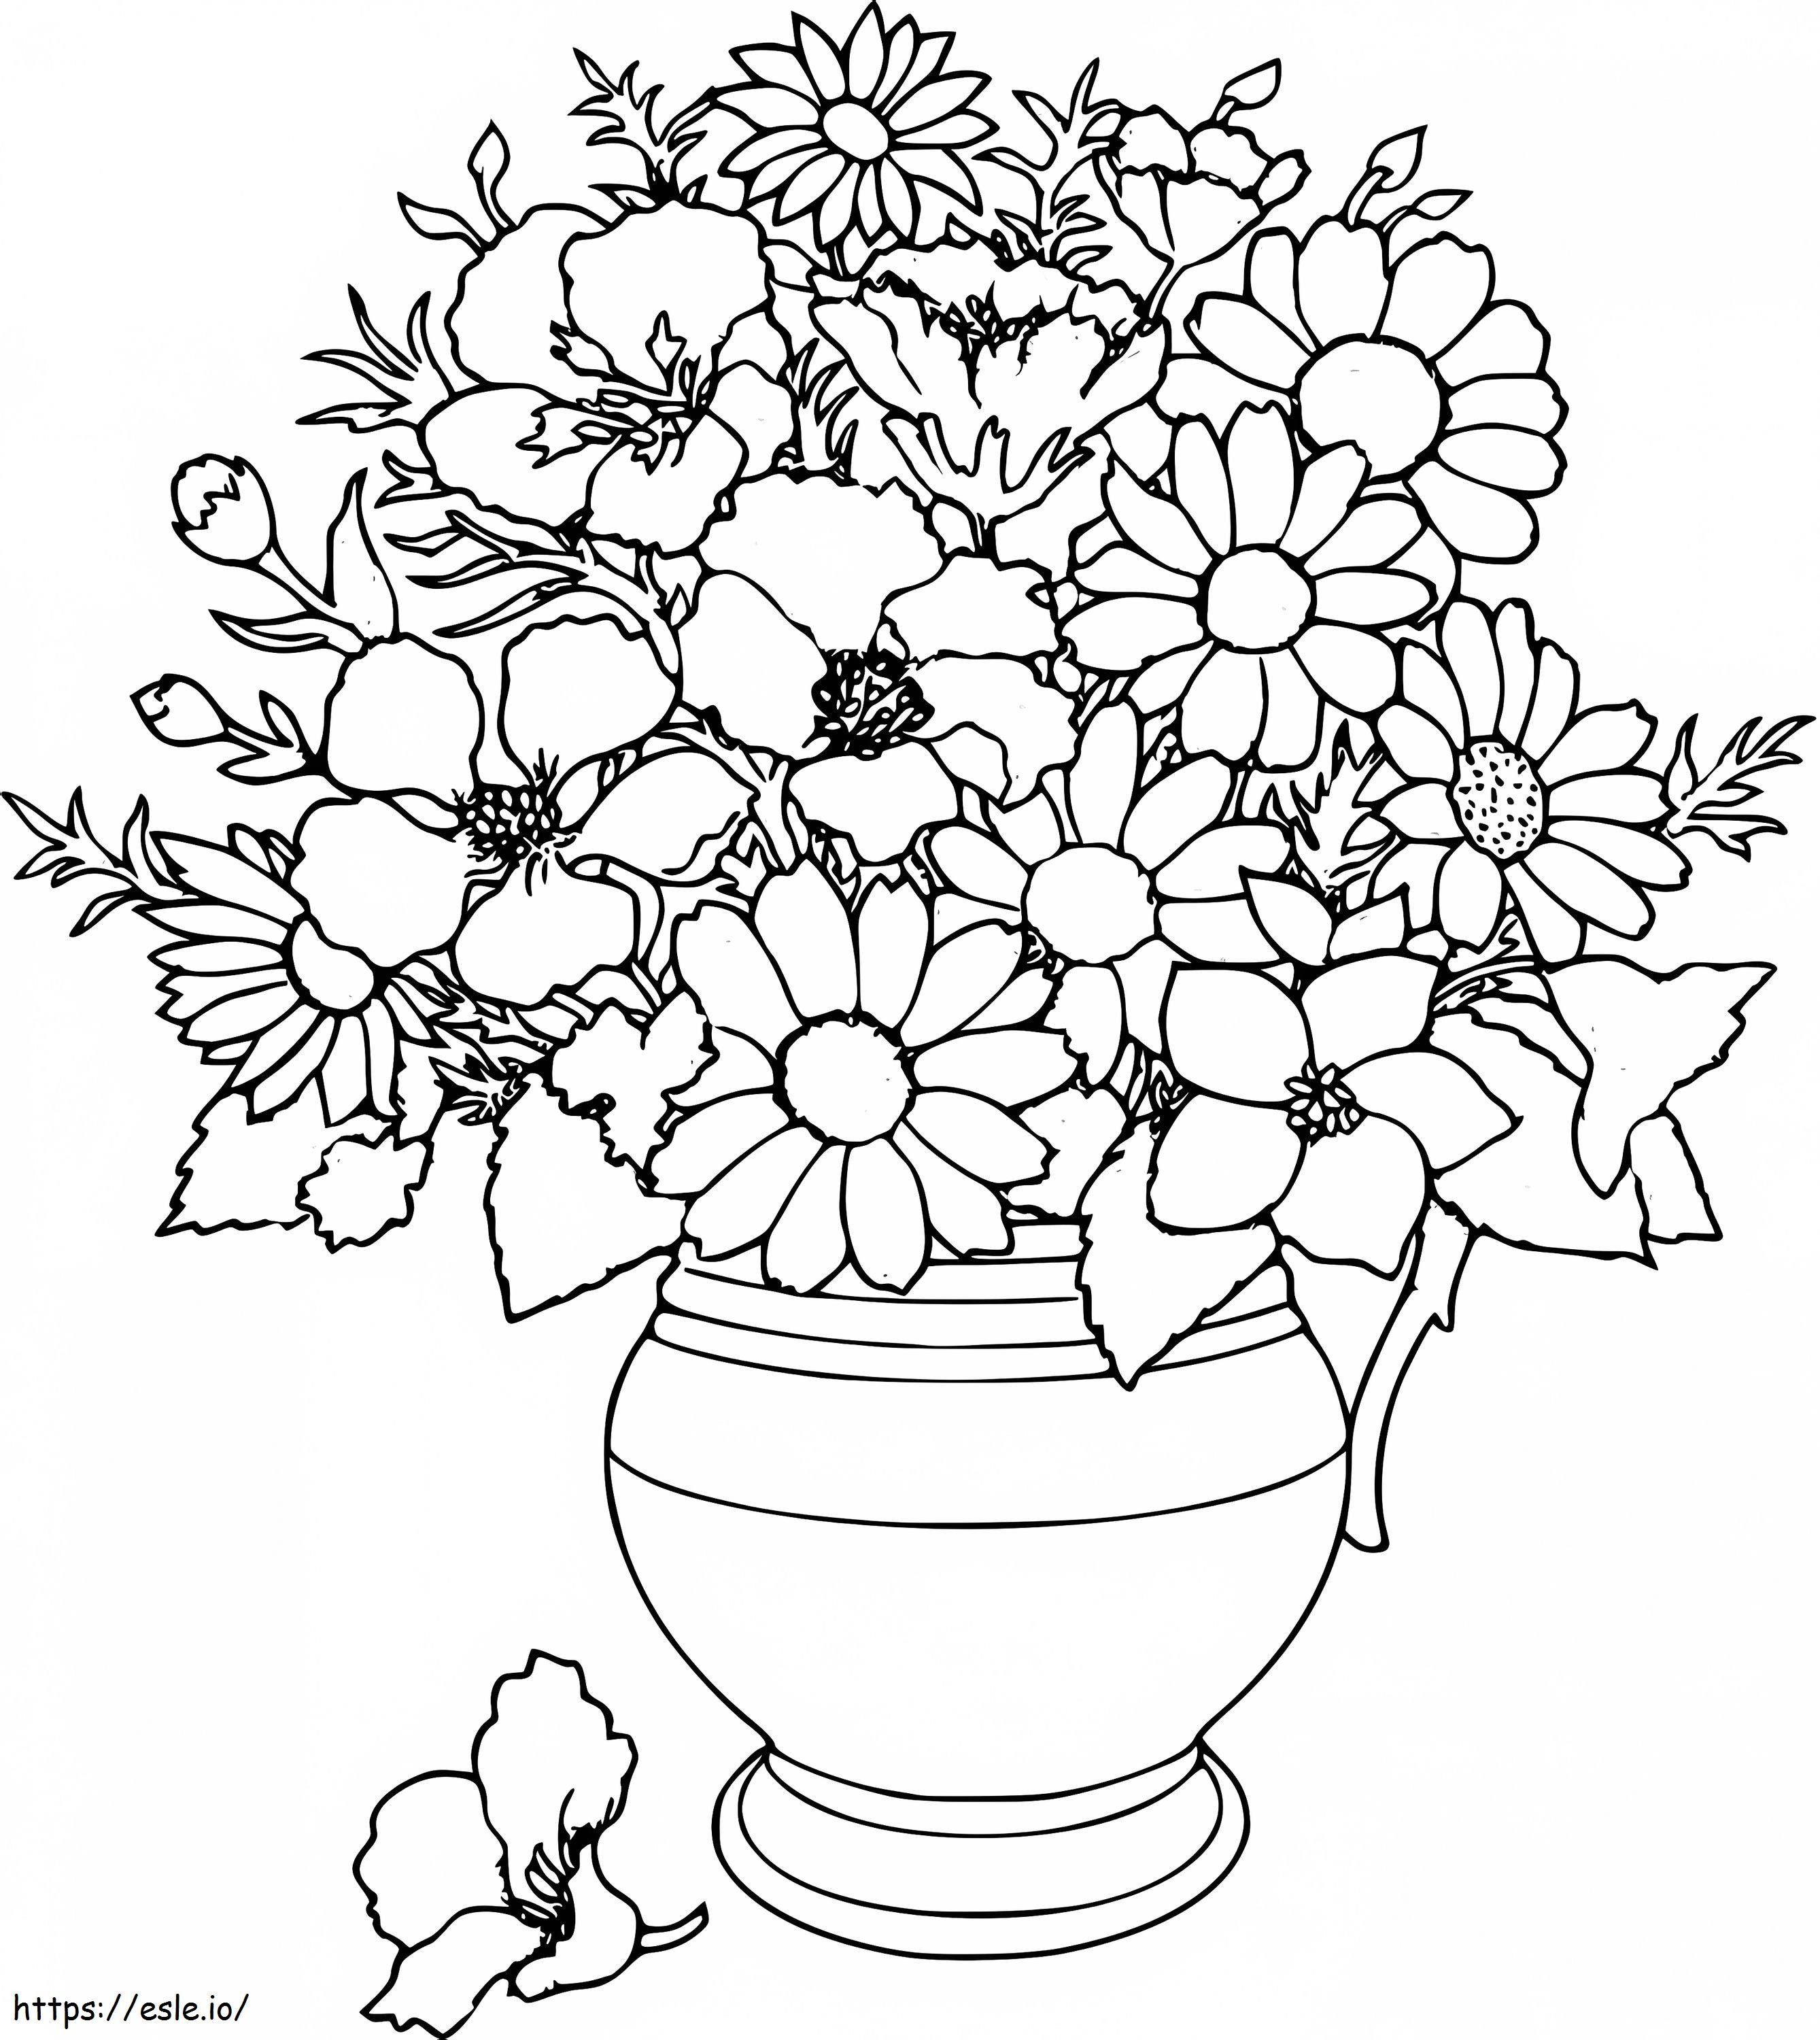 Flower Vase 3 coloring page